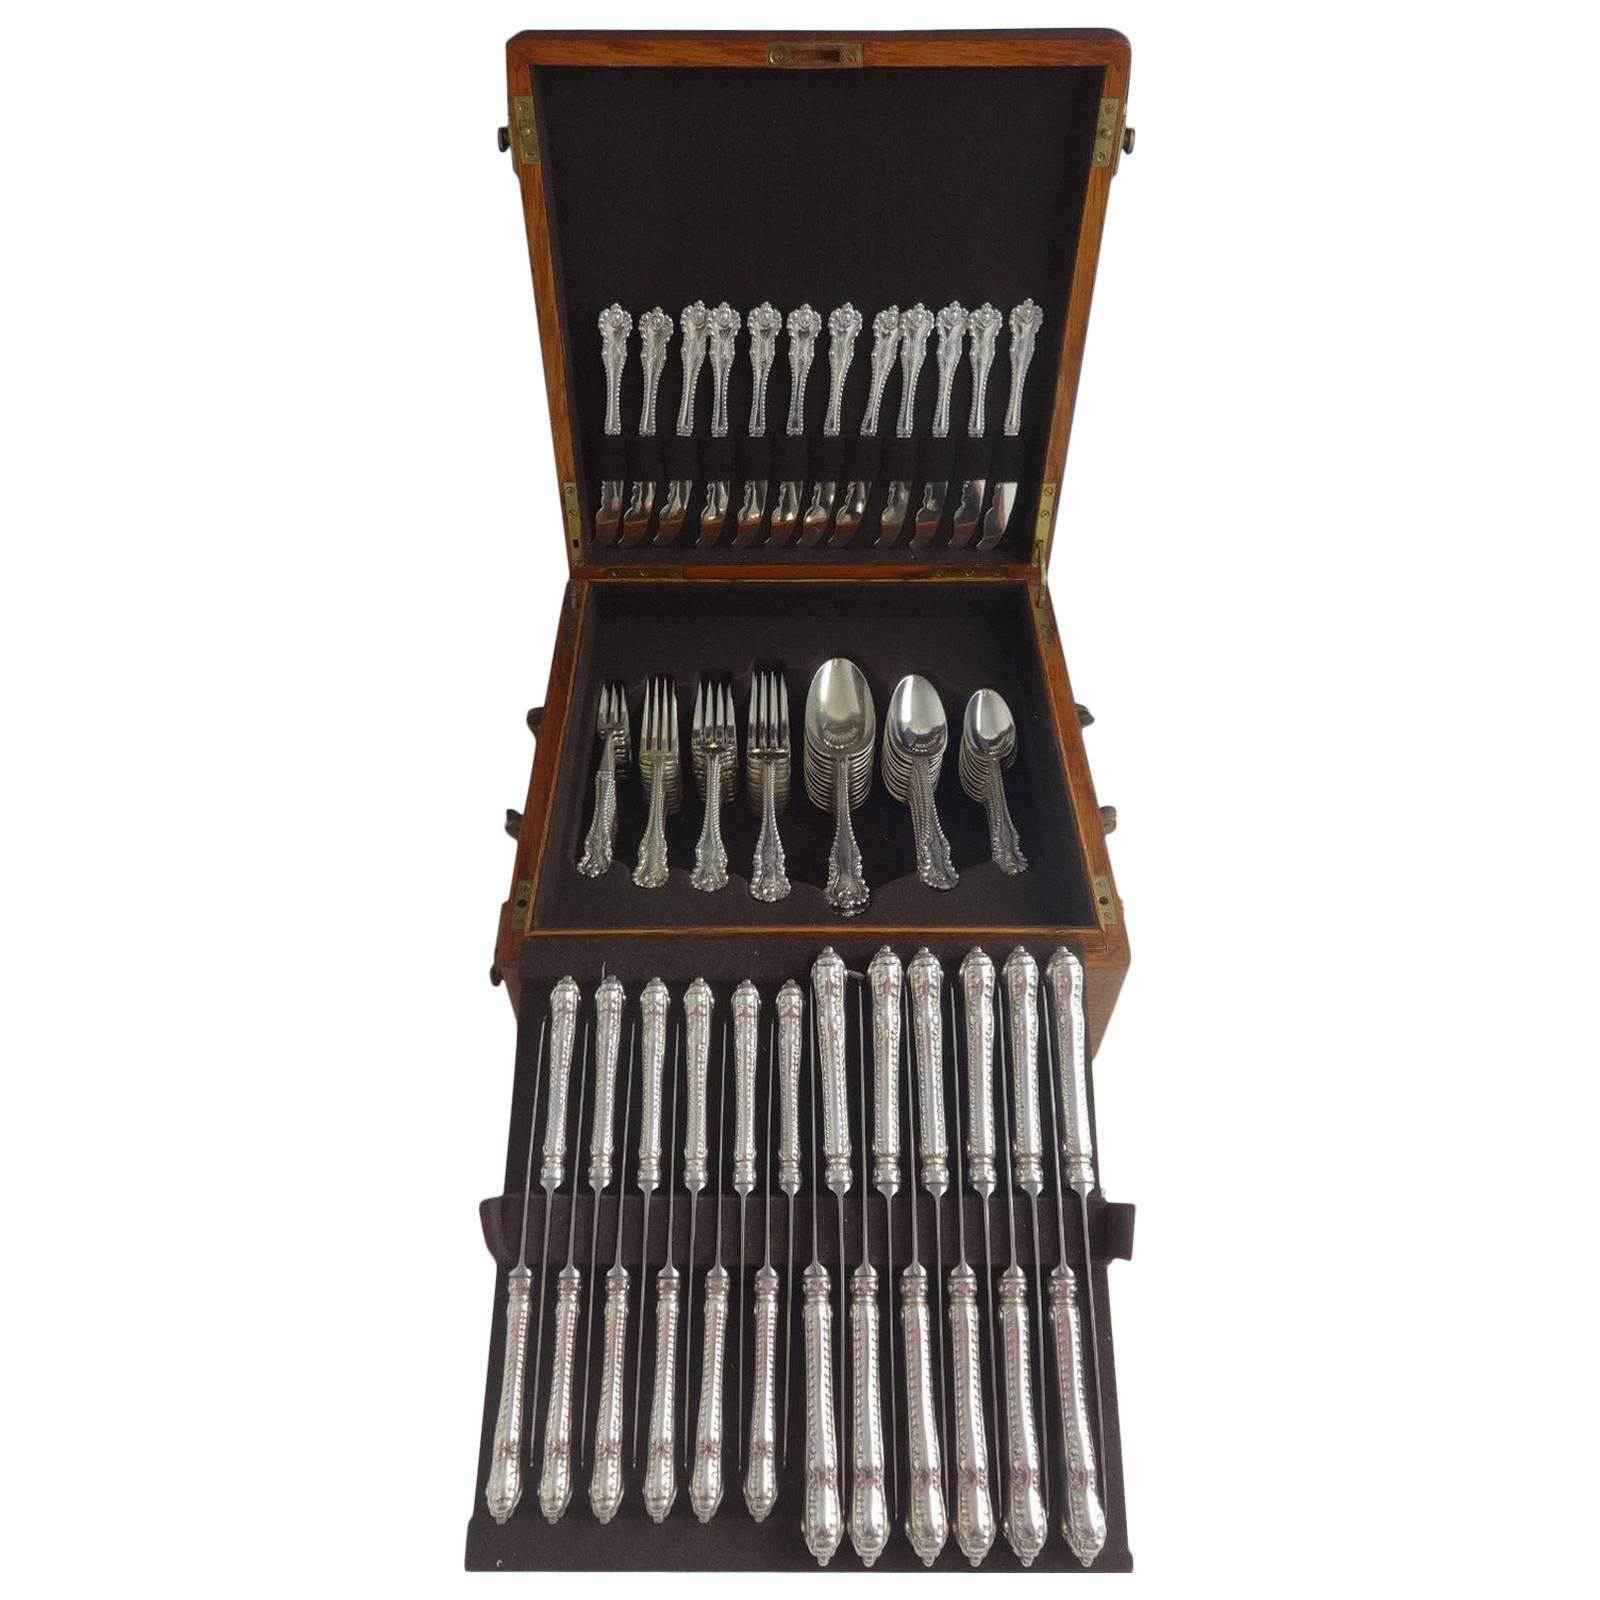 Mazarin by Dominick & Haff. 
 
Superb sterling silver flatware set in the pattern Mazarin by Dominick & Haff. This set includes:

12 dinner knives, 10